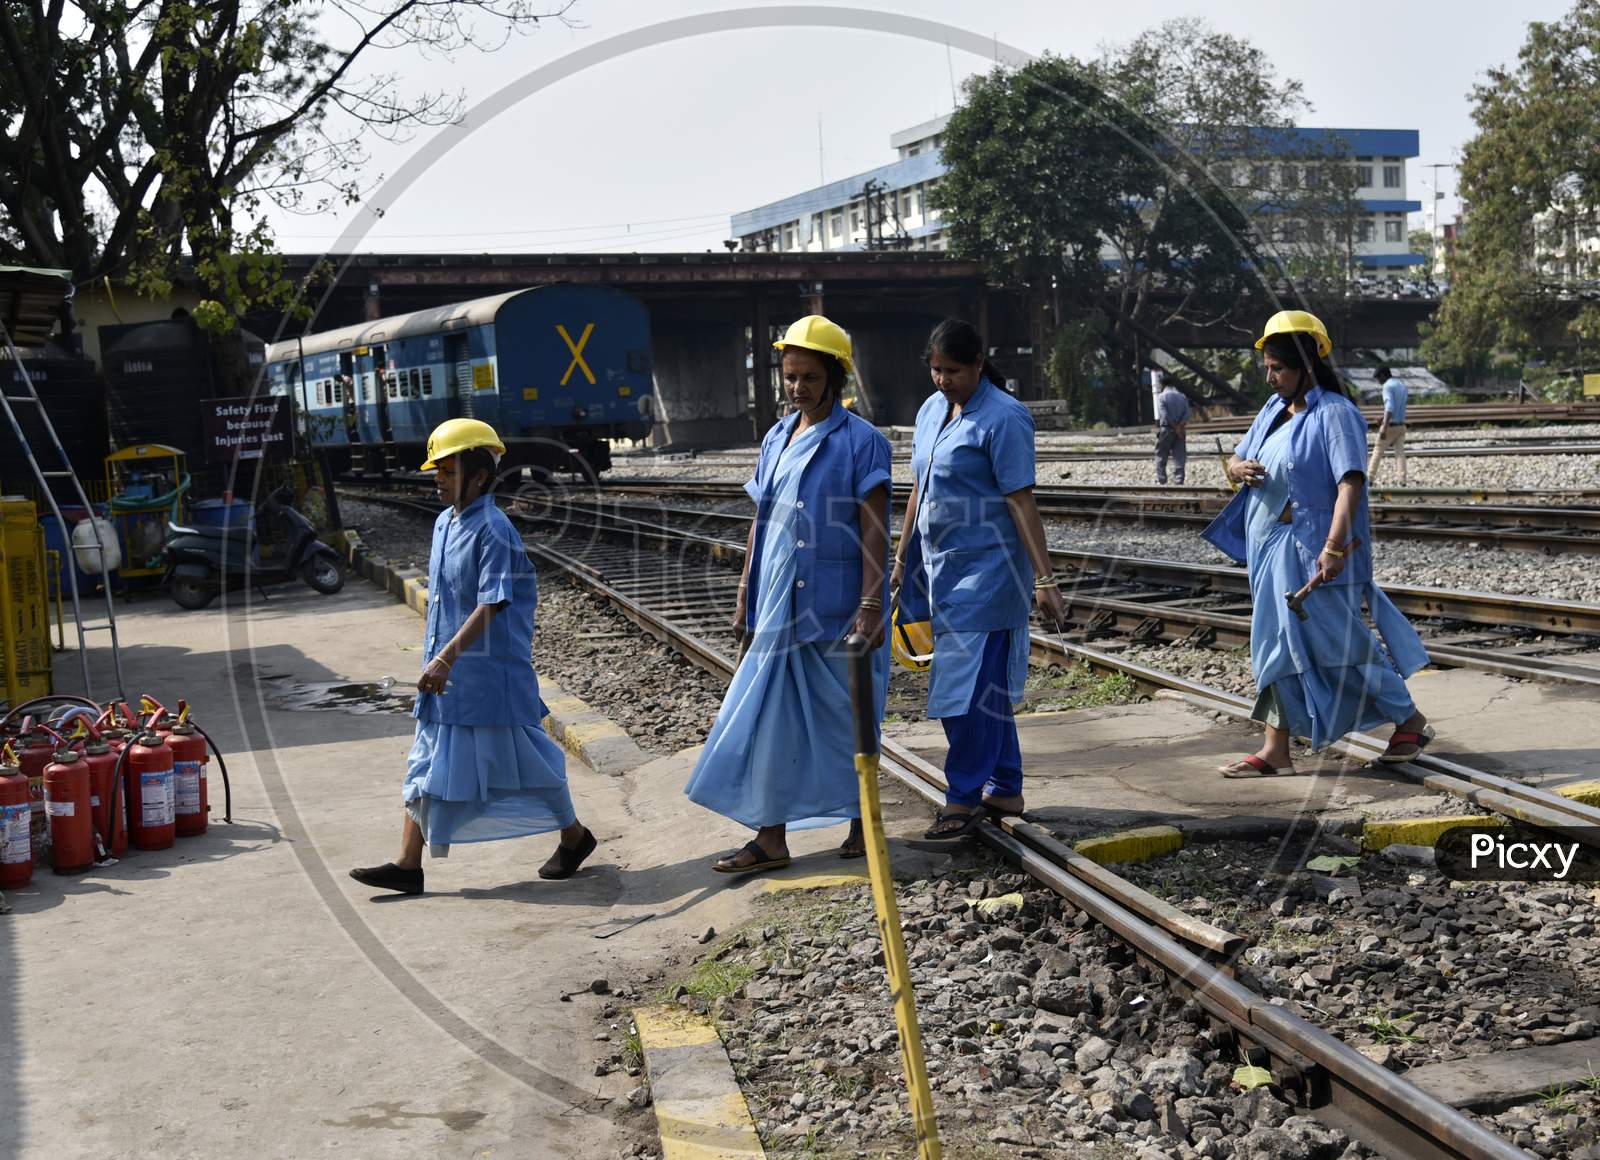 Guwahati, Assam, India. March 6, 2019. Women Workers Of The Northeast Frontier Railway Working At Guwahati Railway Station, As International Women'S Day Is Celebrated On March 8 Every Year.